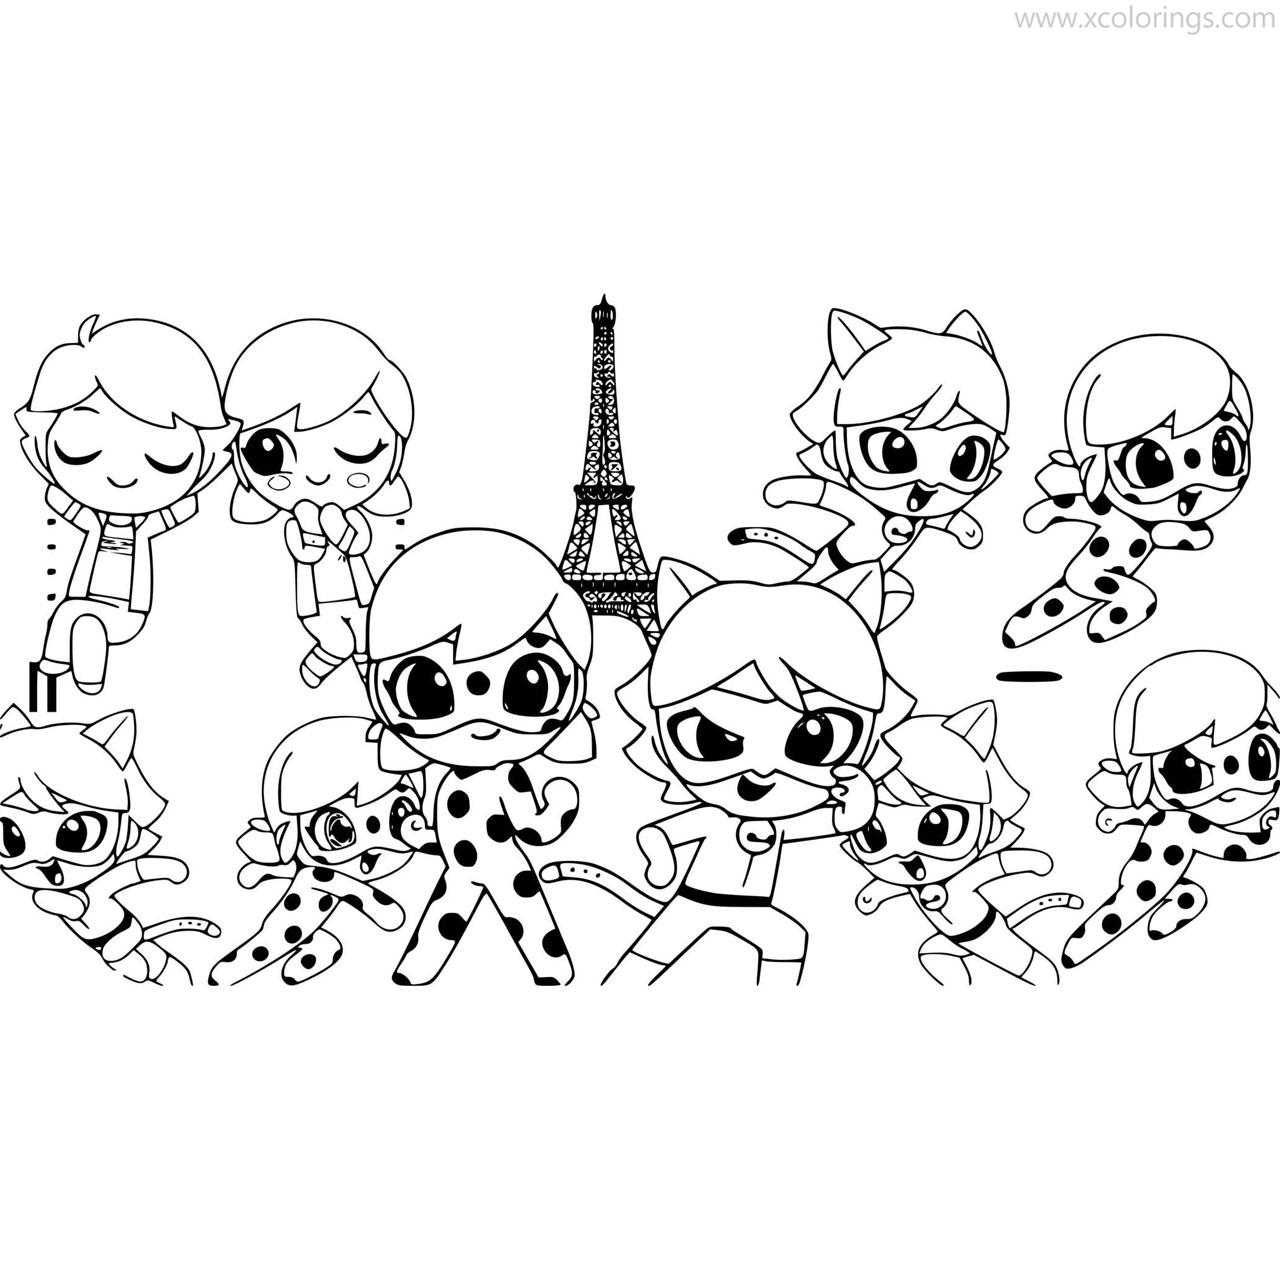 Chibi Miraculous Ladybug Coloring Pages - XColorings.com